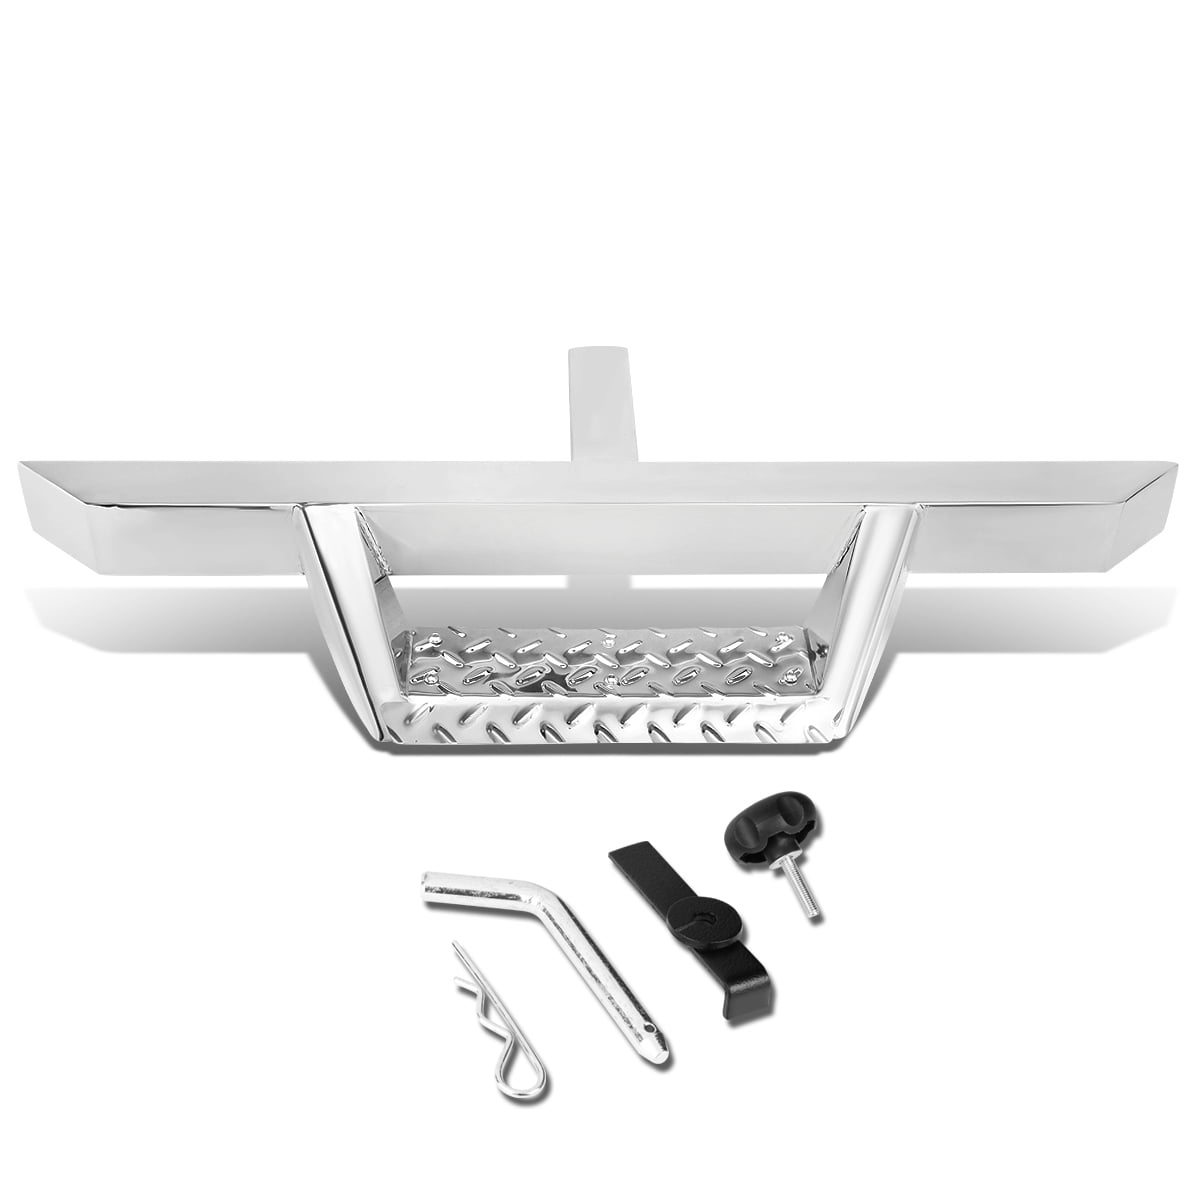 DNA Motoring PT-ZTL-8079-BK 2 Inches Receiver 26.75 x 4 Inches Square Tow Hitch Step Bar 